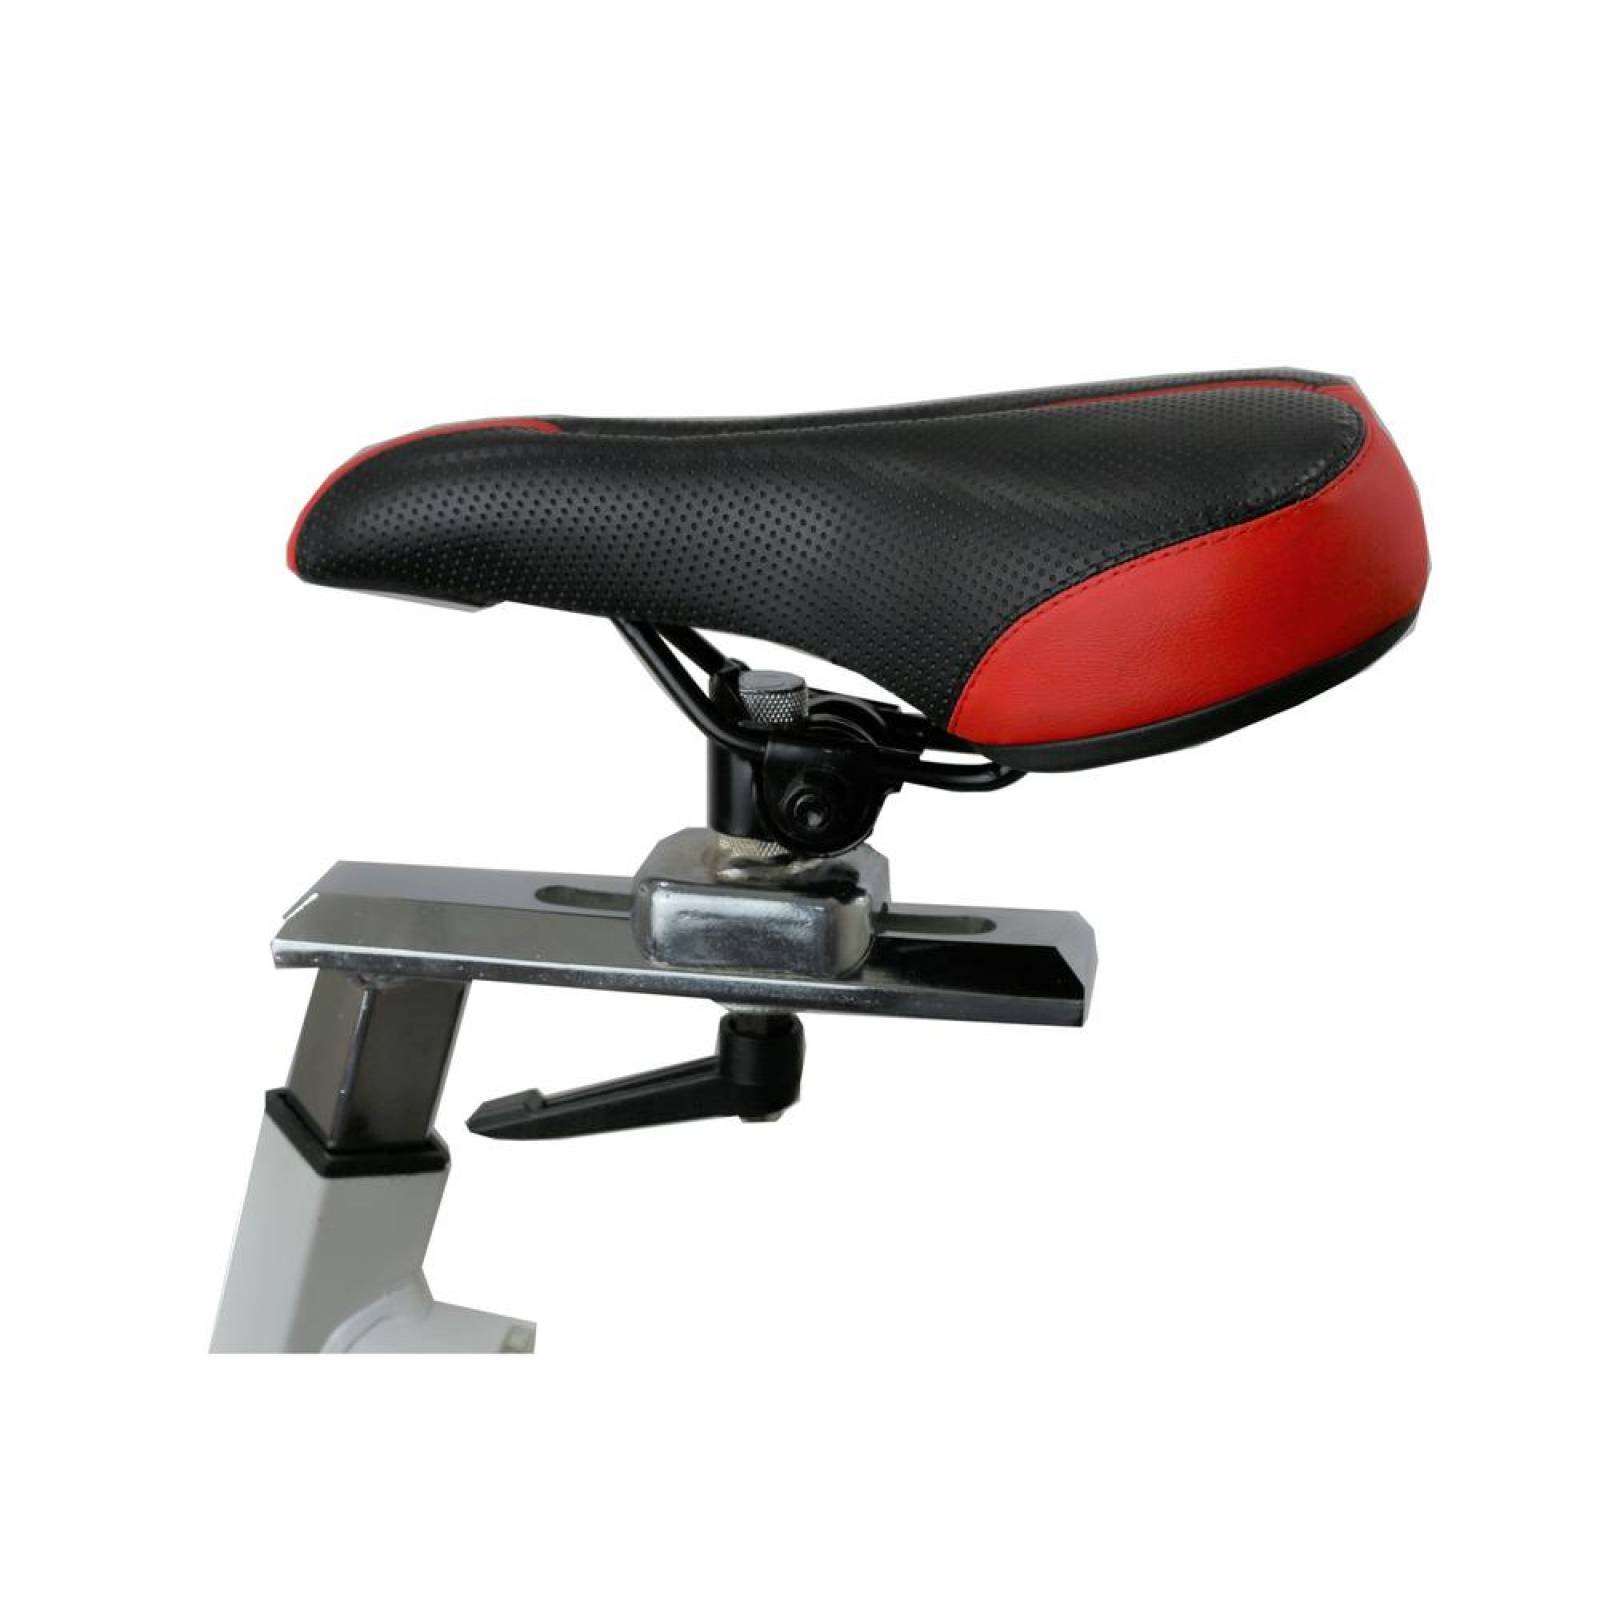 Bicicleta Spinning 18kg Fuxion Sports(CL) 